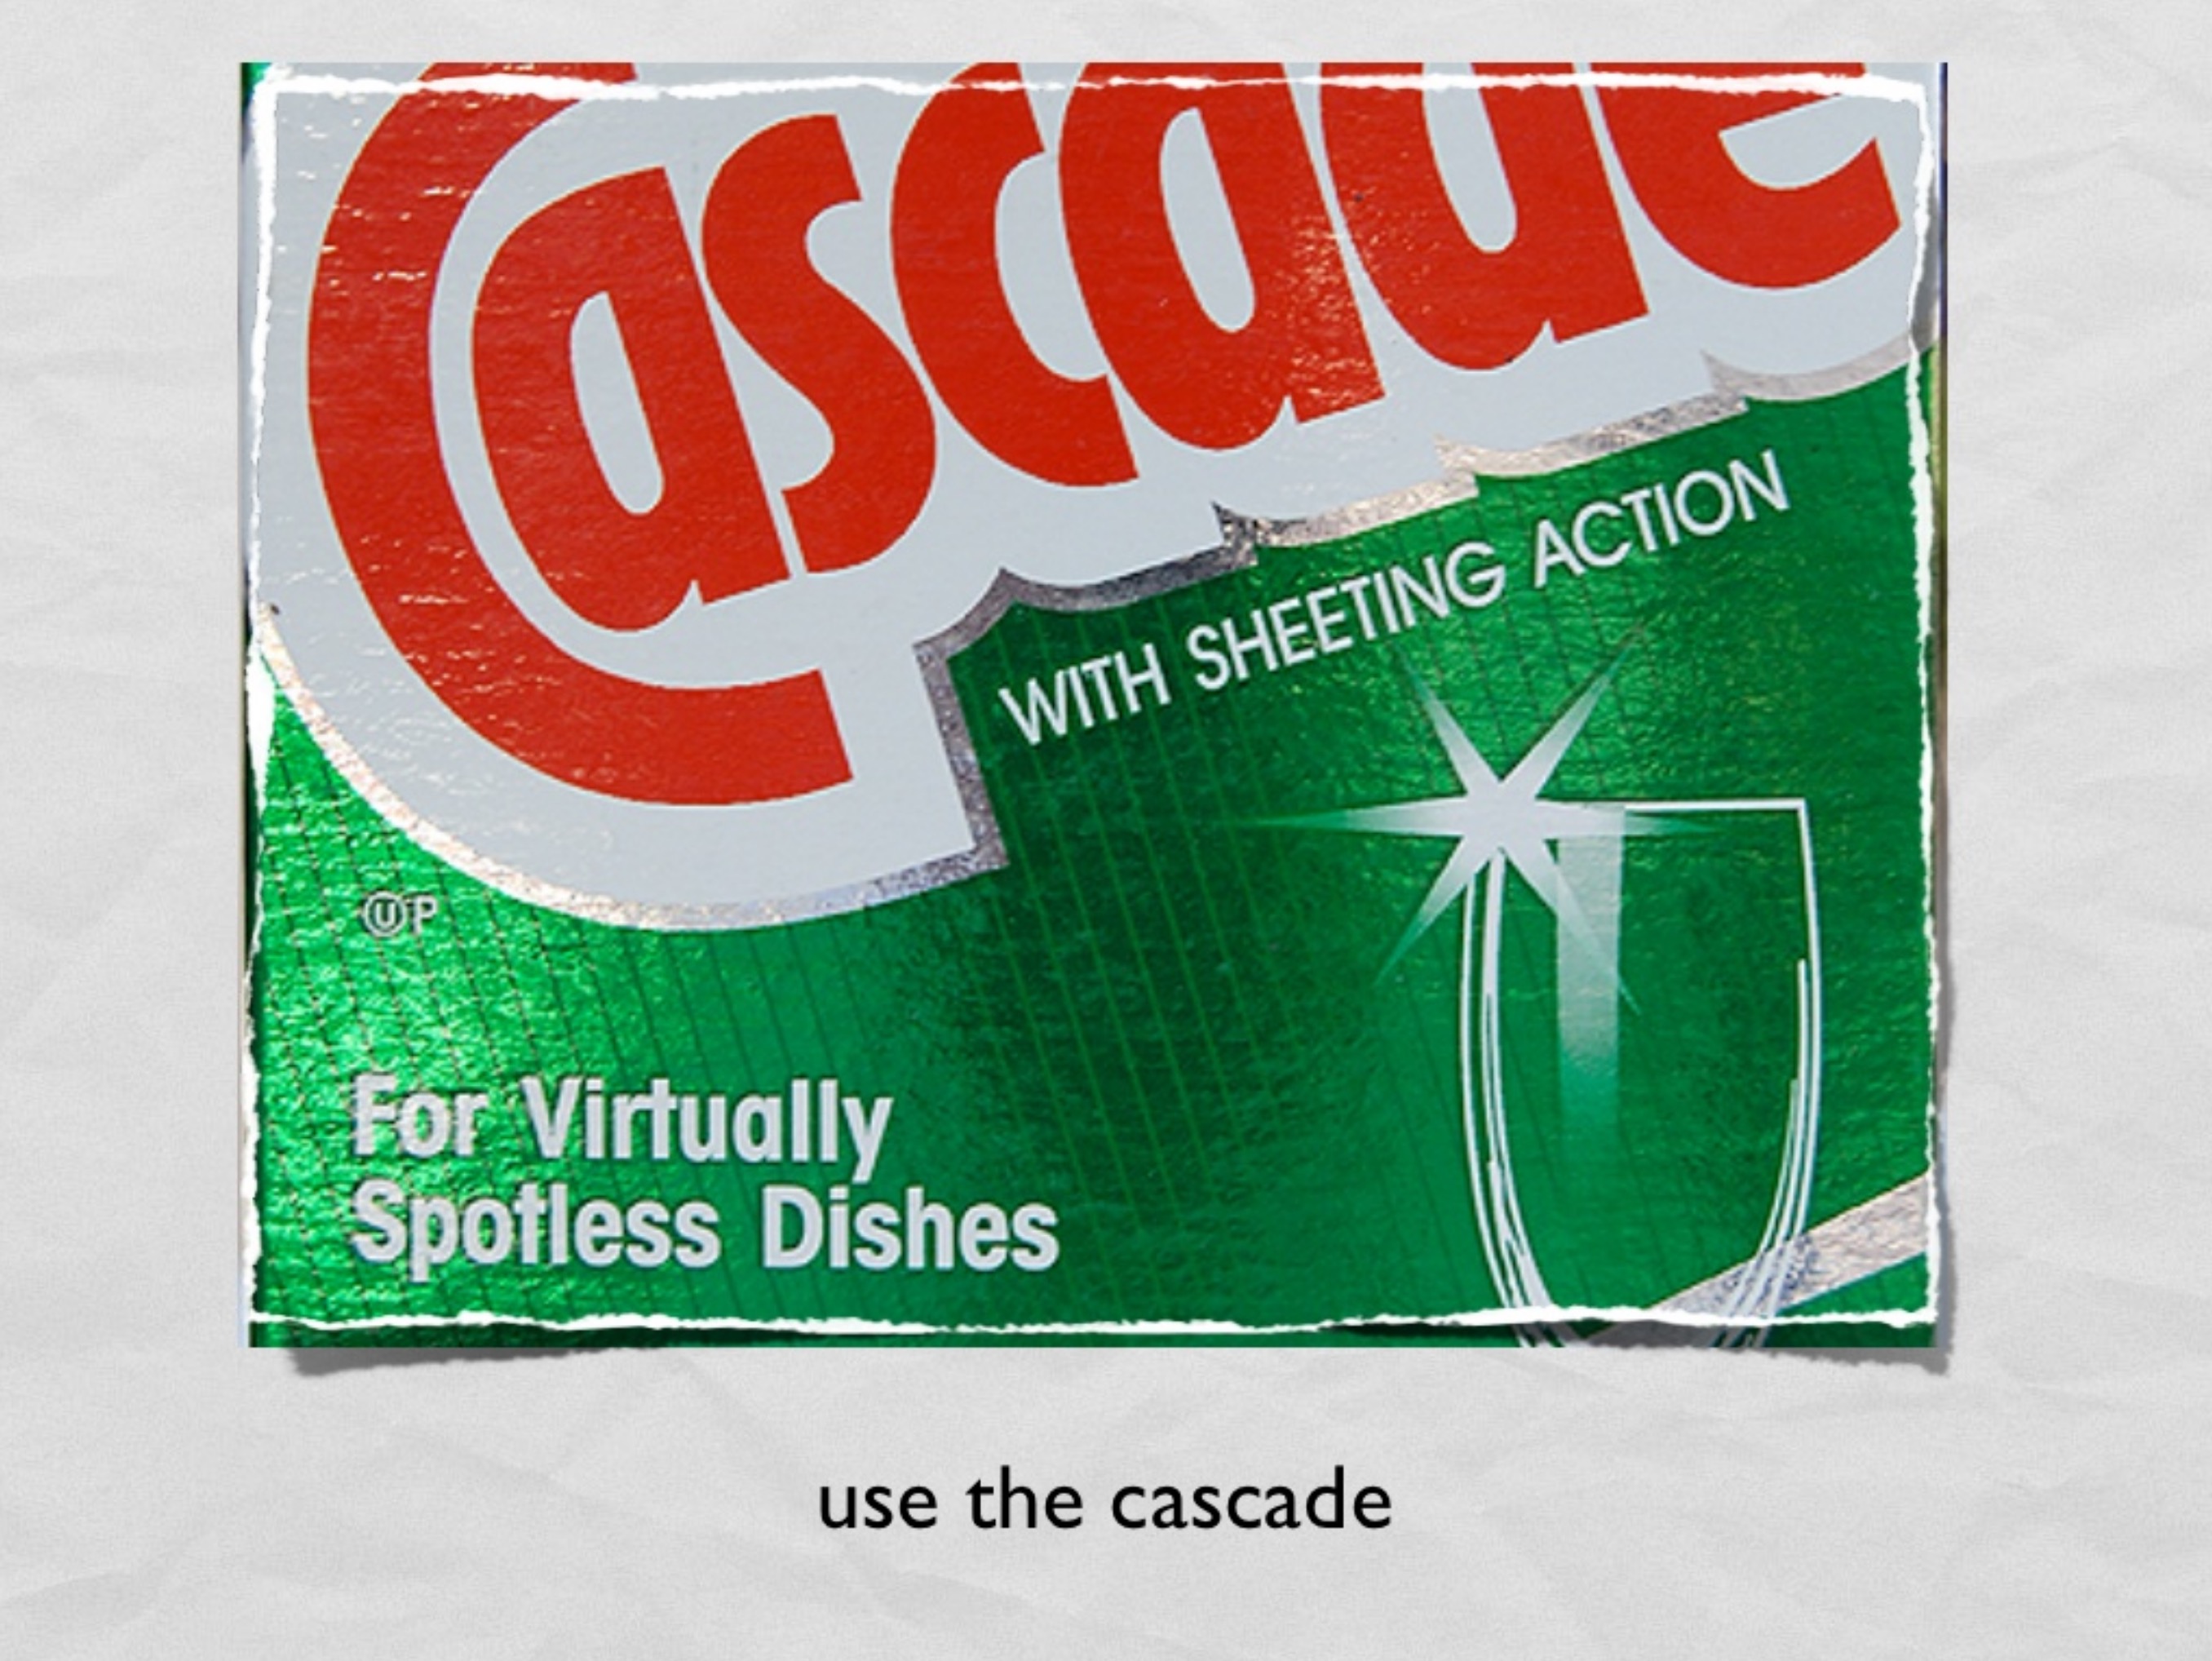 Product label for Cascade,
with sheeting action for virtually spotless dishes -
subtitled Use the Cascade
